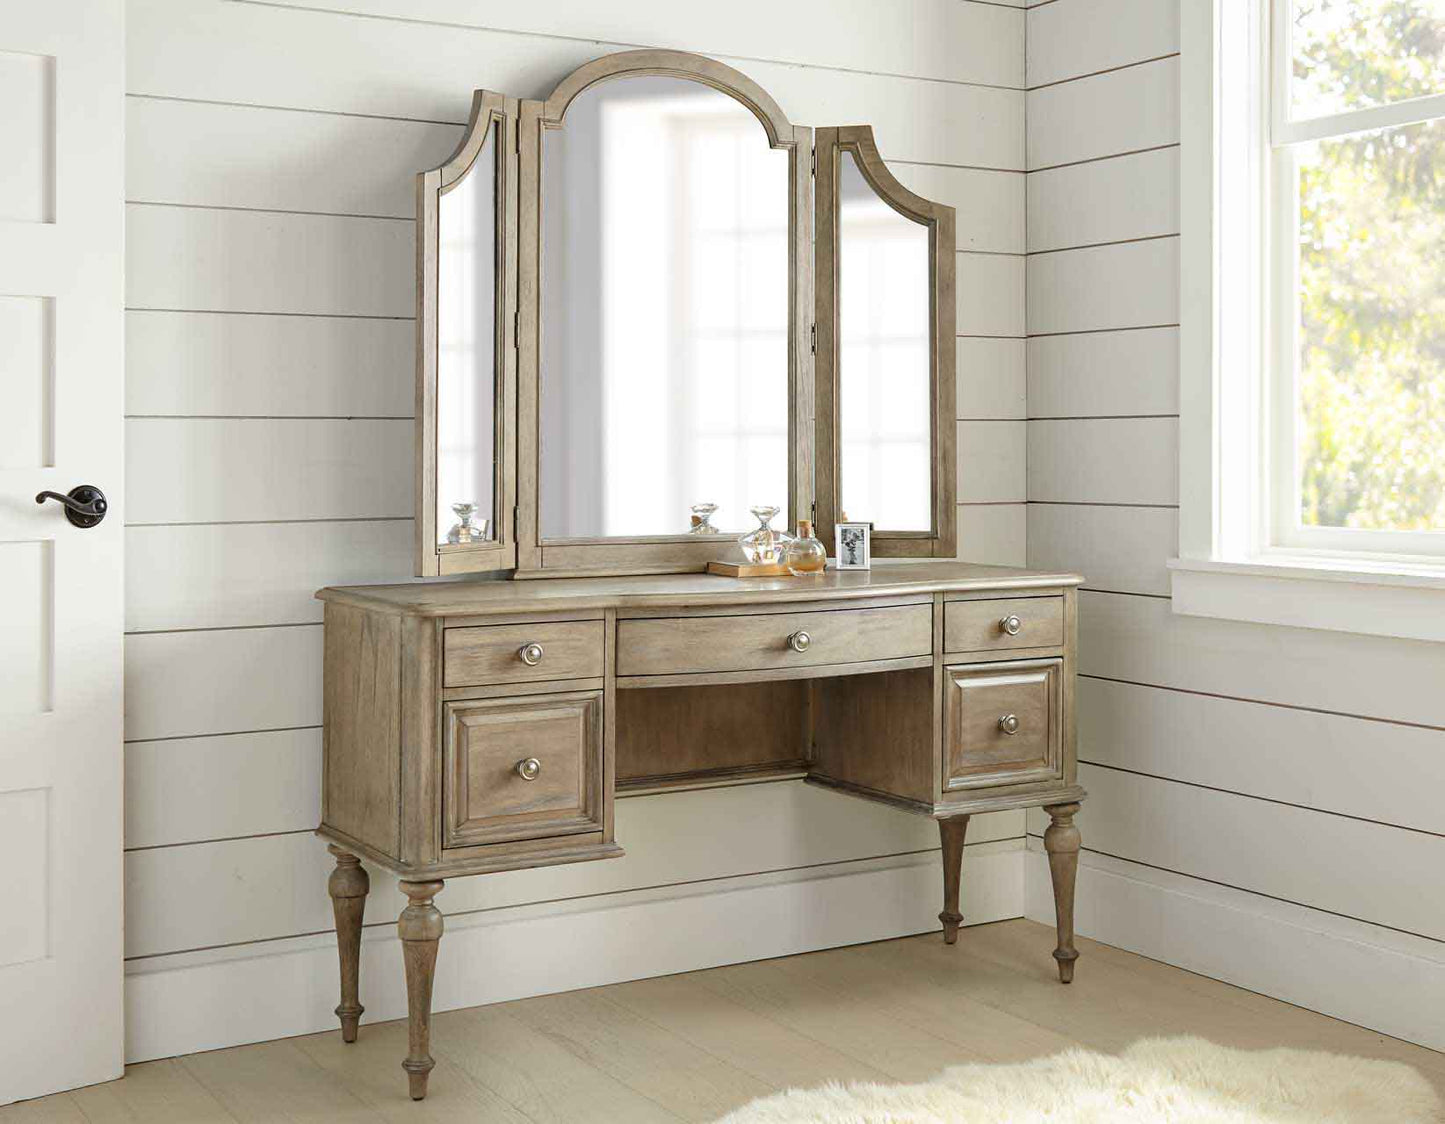 Highland Park Waxed Driftwood Vanity Set by Steve Silver